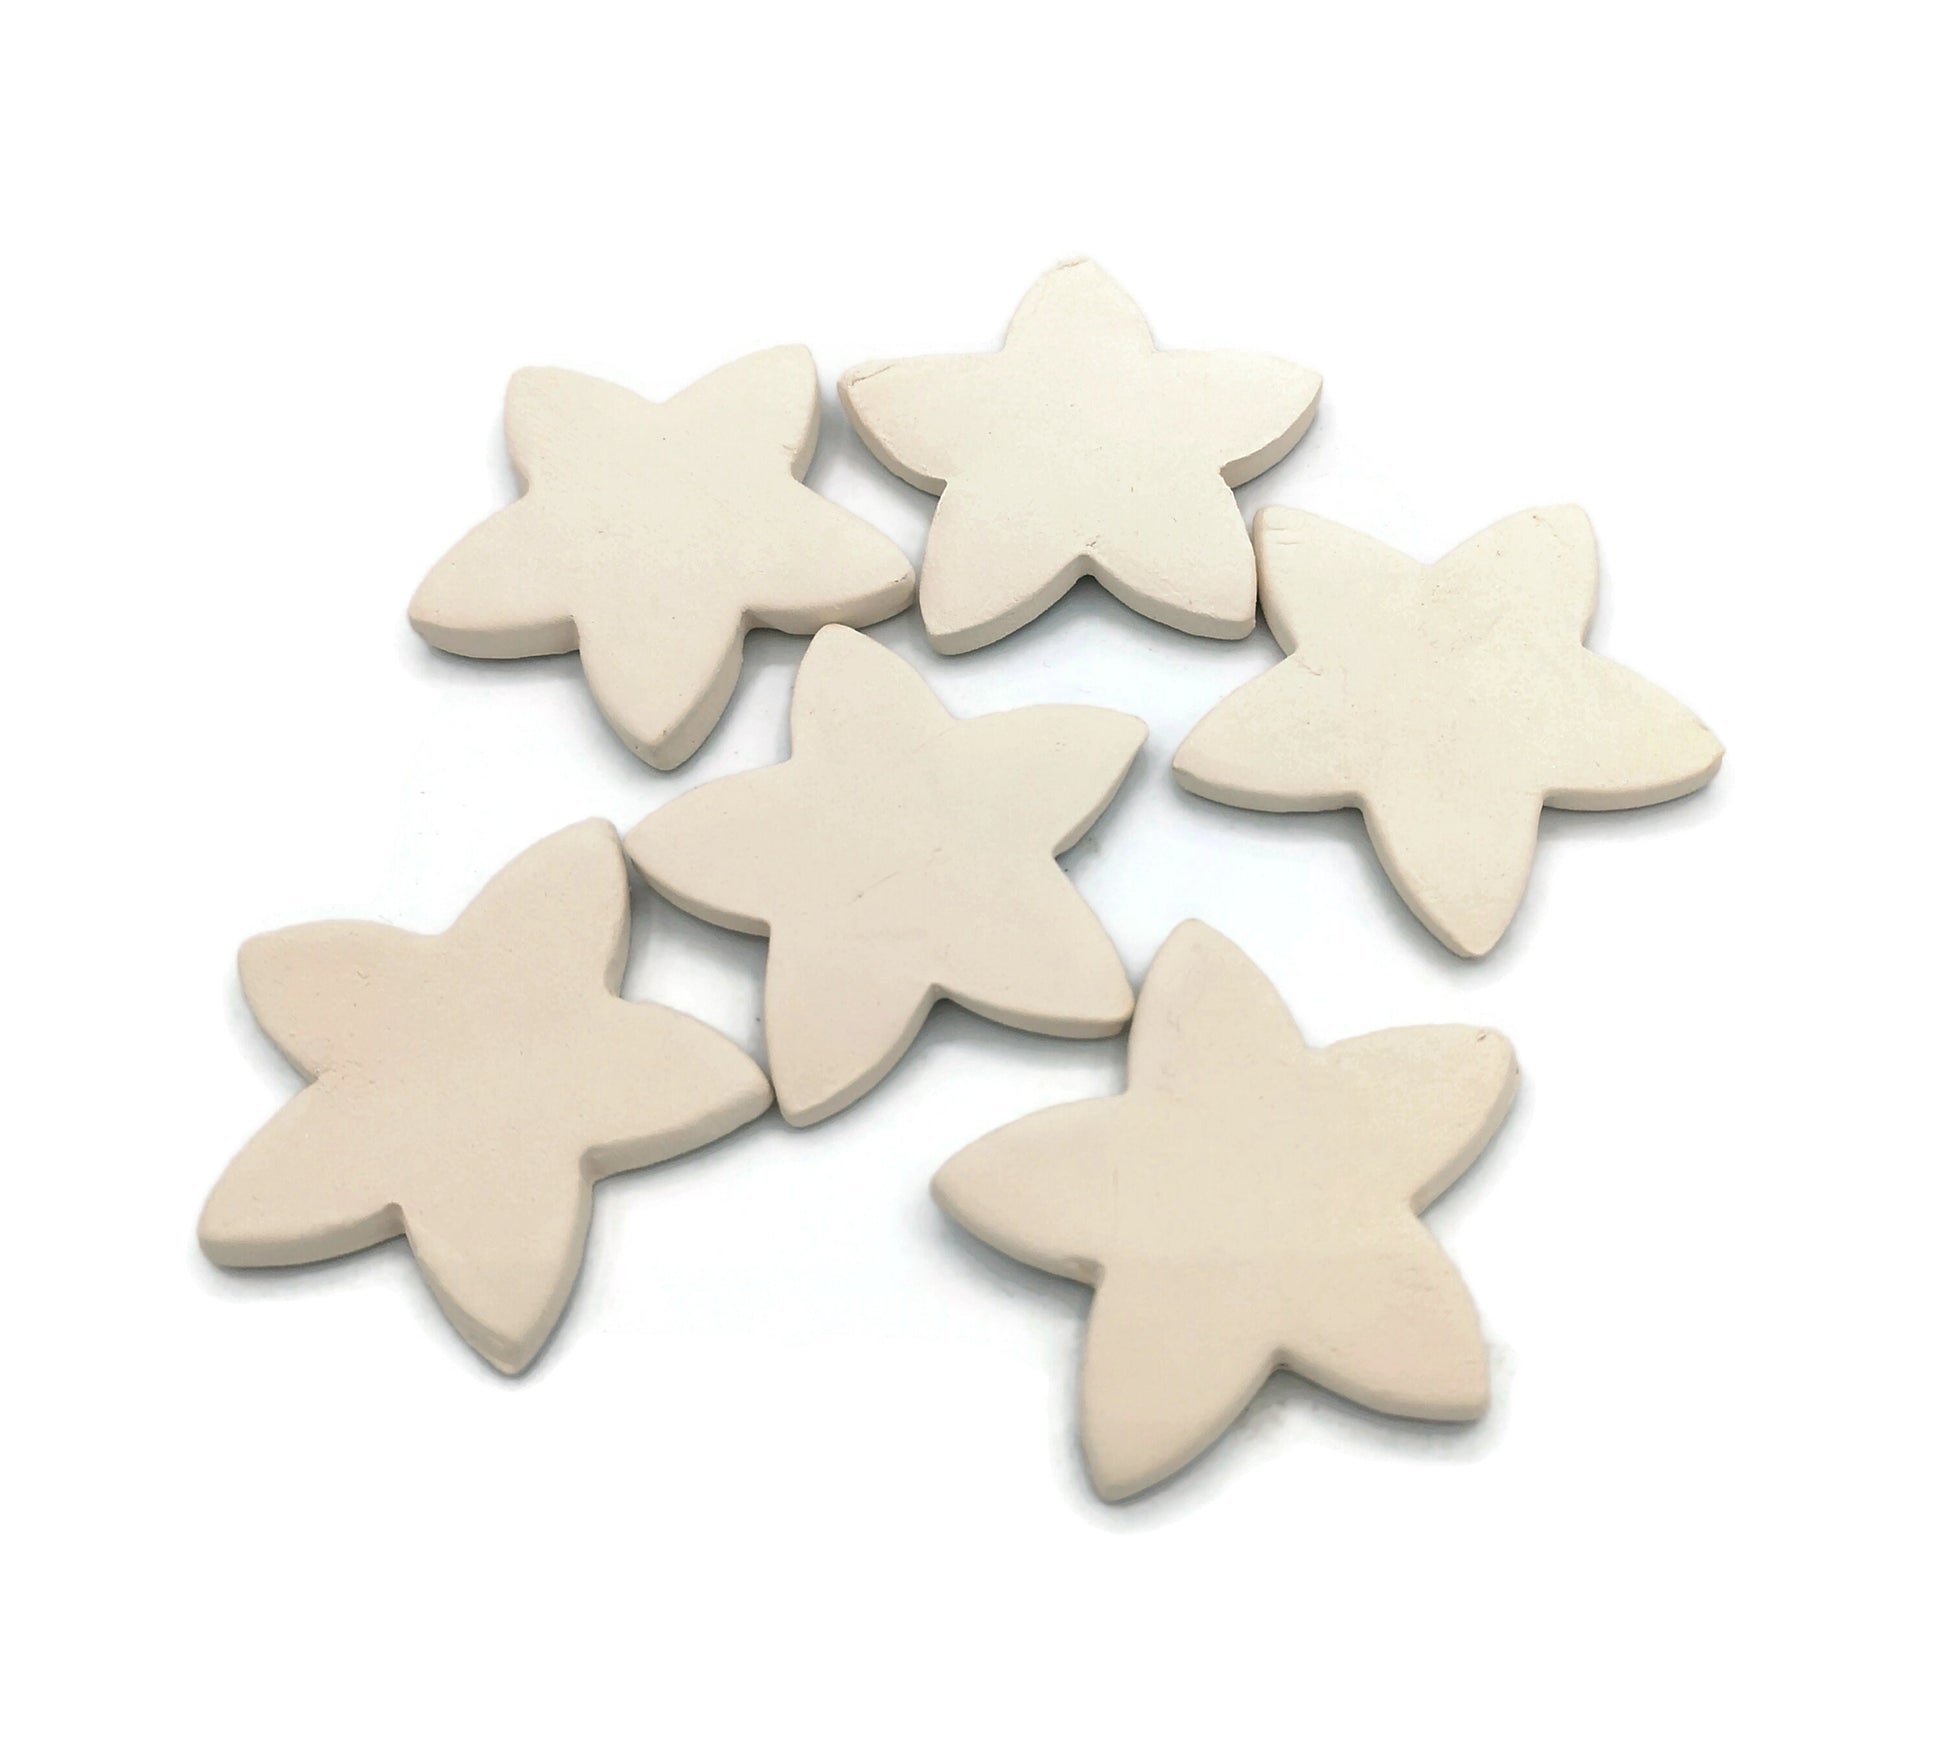 6Pc 45mm Small Ceramic Tiles Star Shaped, Tiny Mosaic Tiles For Crafts, Unpainted Ceramic Bisque Ready To Paint, Best Sellers Handmade - Ceramica Ana Rafael